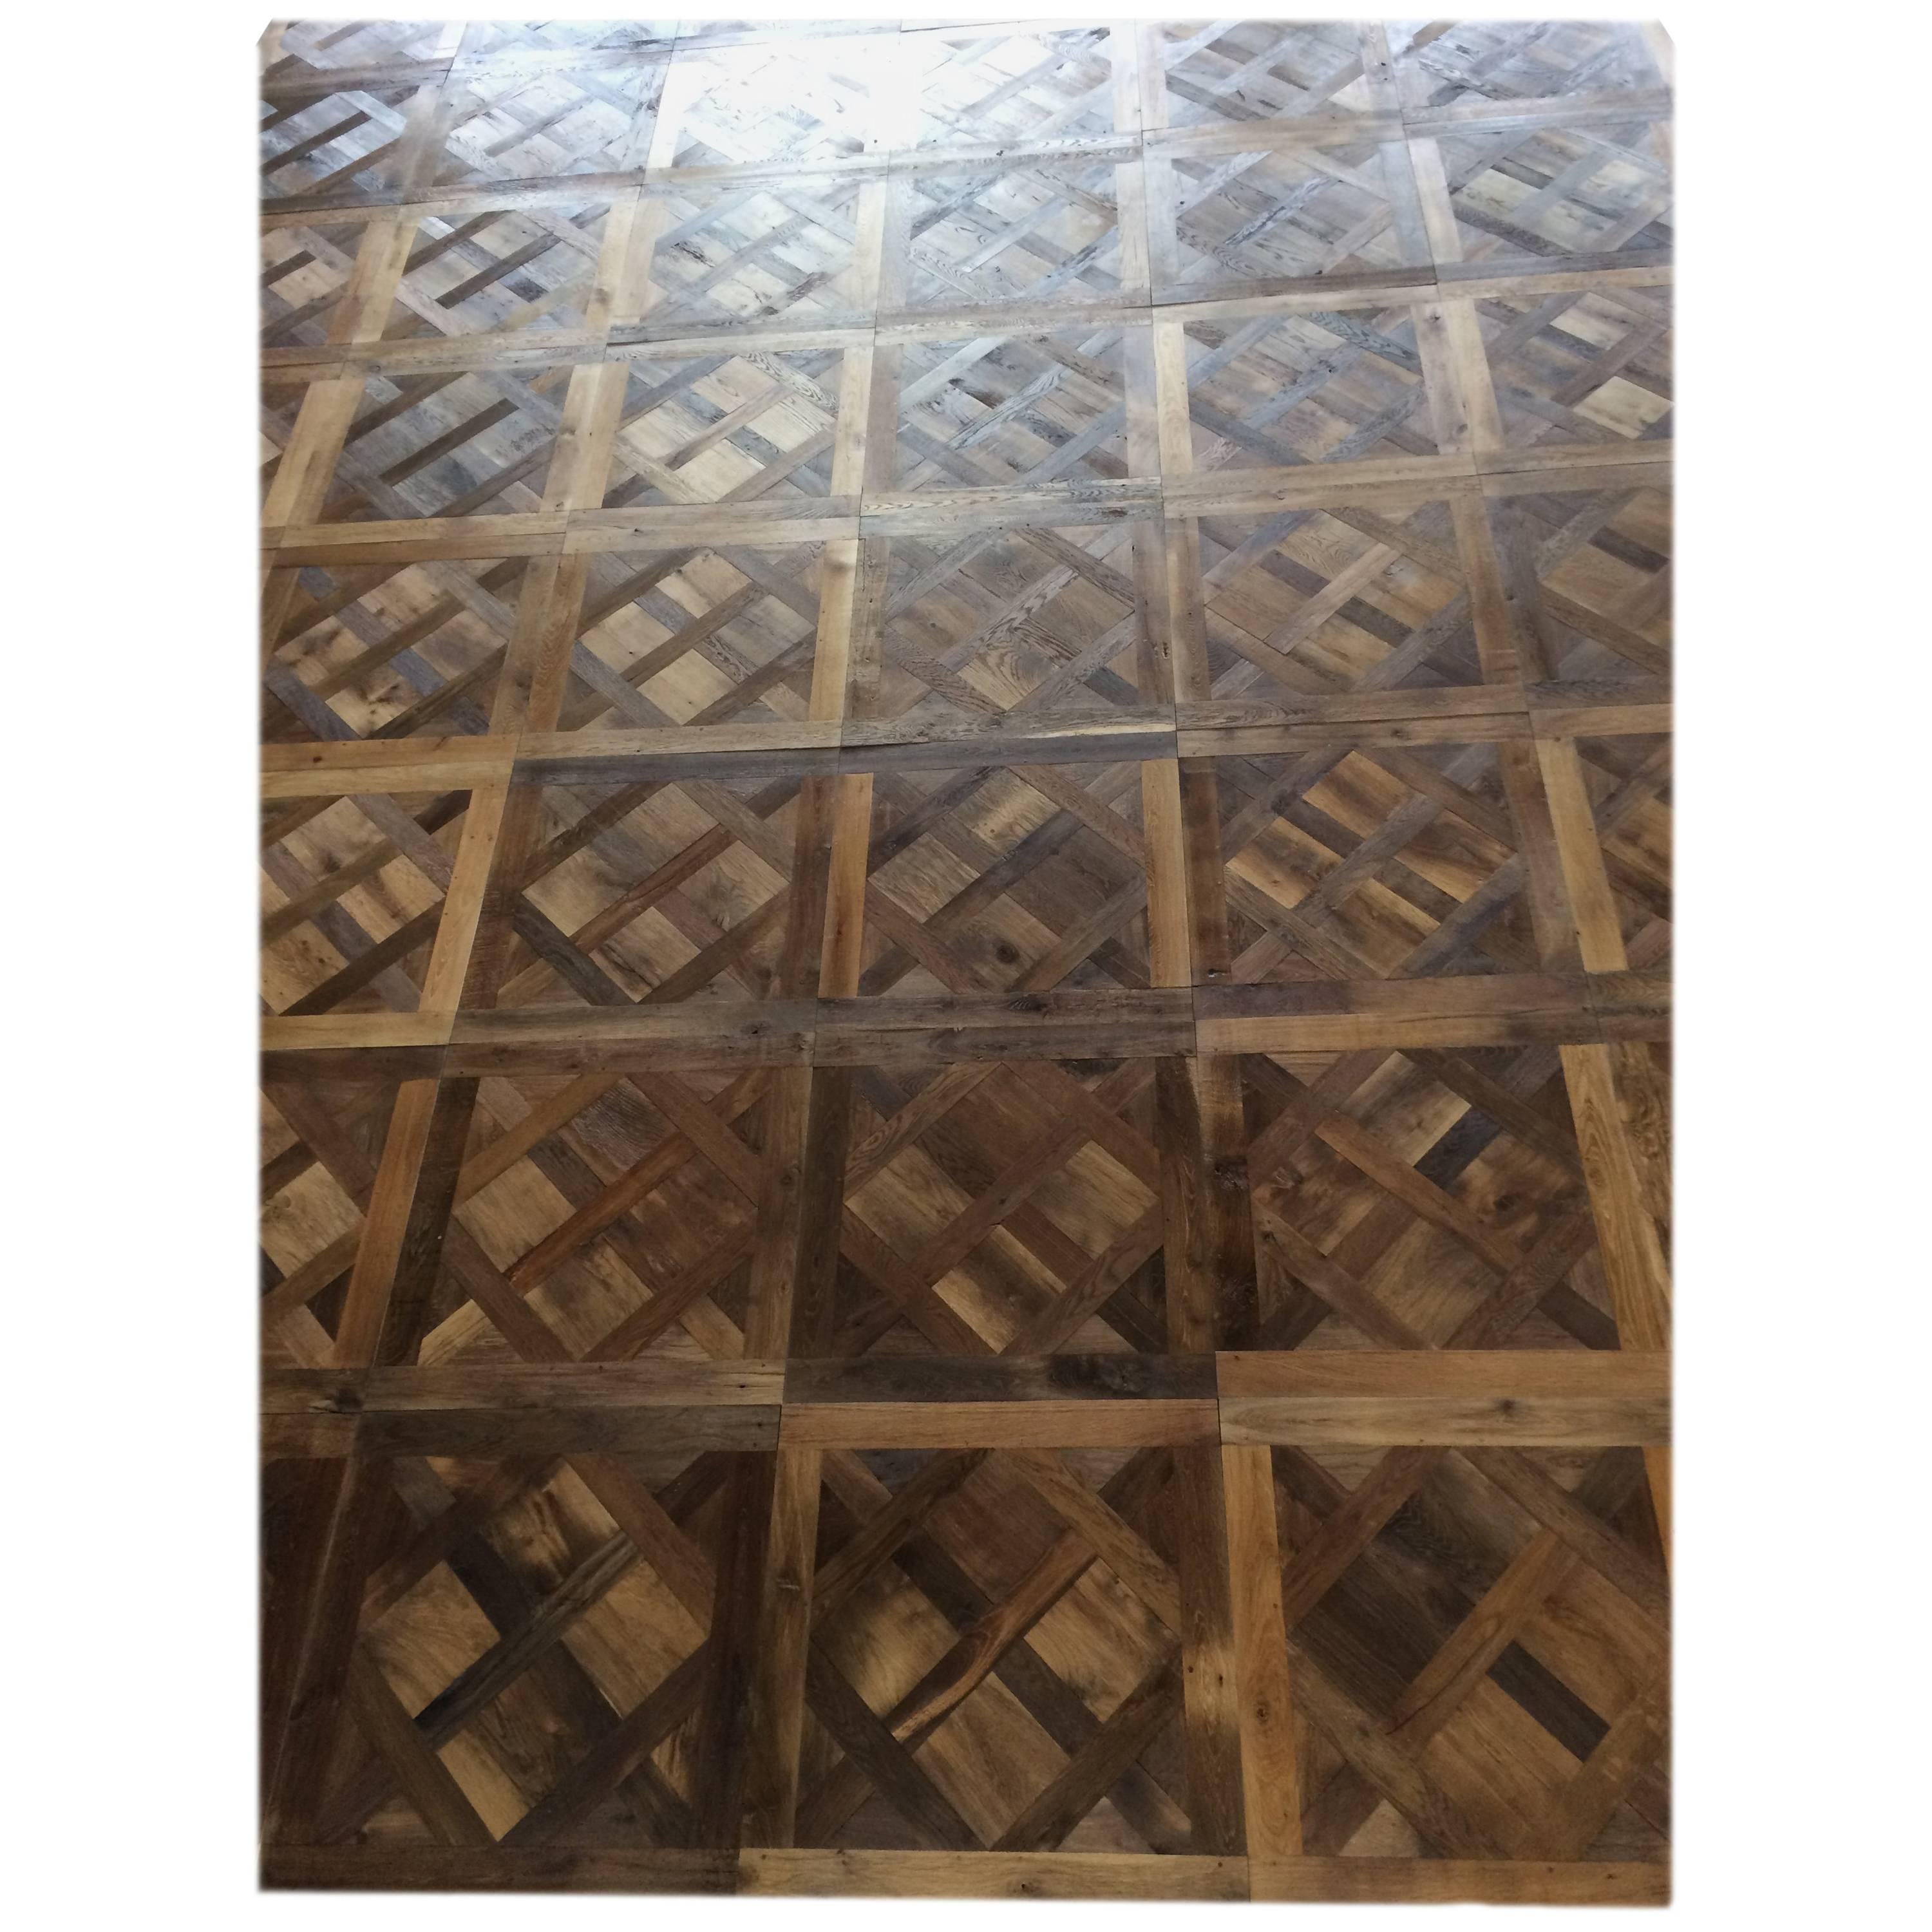 French parquet de France solid antique oakwood handmade in France.
Excellent quality work, hand finished as the old way like 200 years old.
Ready for installation as it is, excellent condition.
Each panel is about 10 square feet (1m2).
Price is per